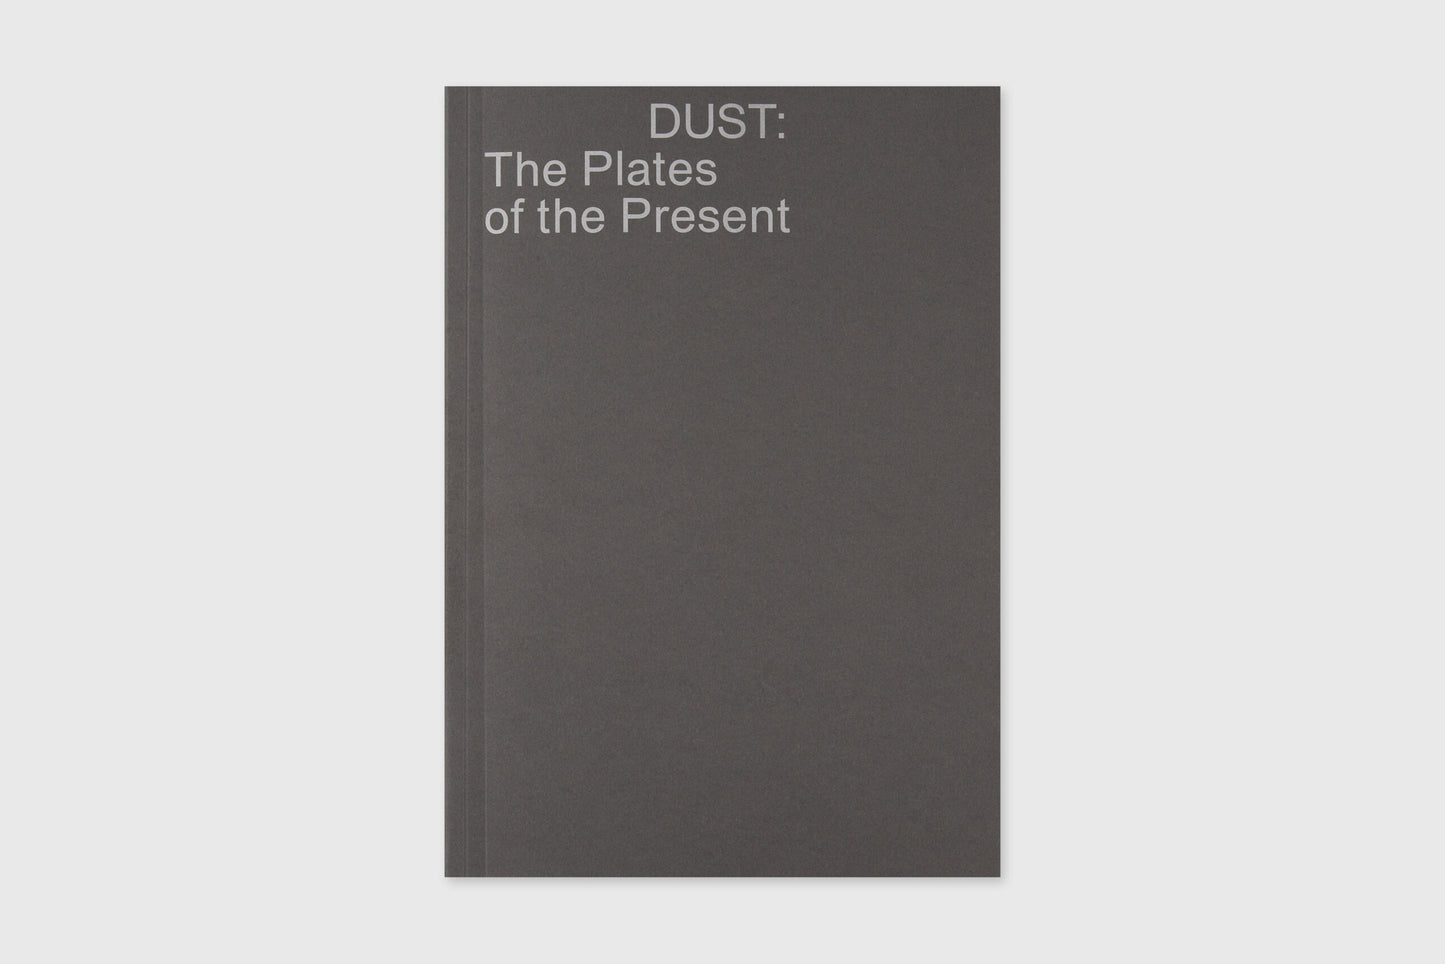 DUST: The Plates of the Present